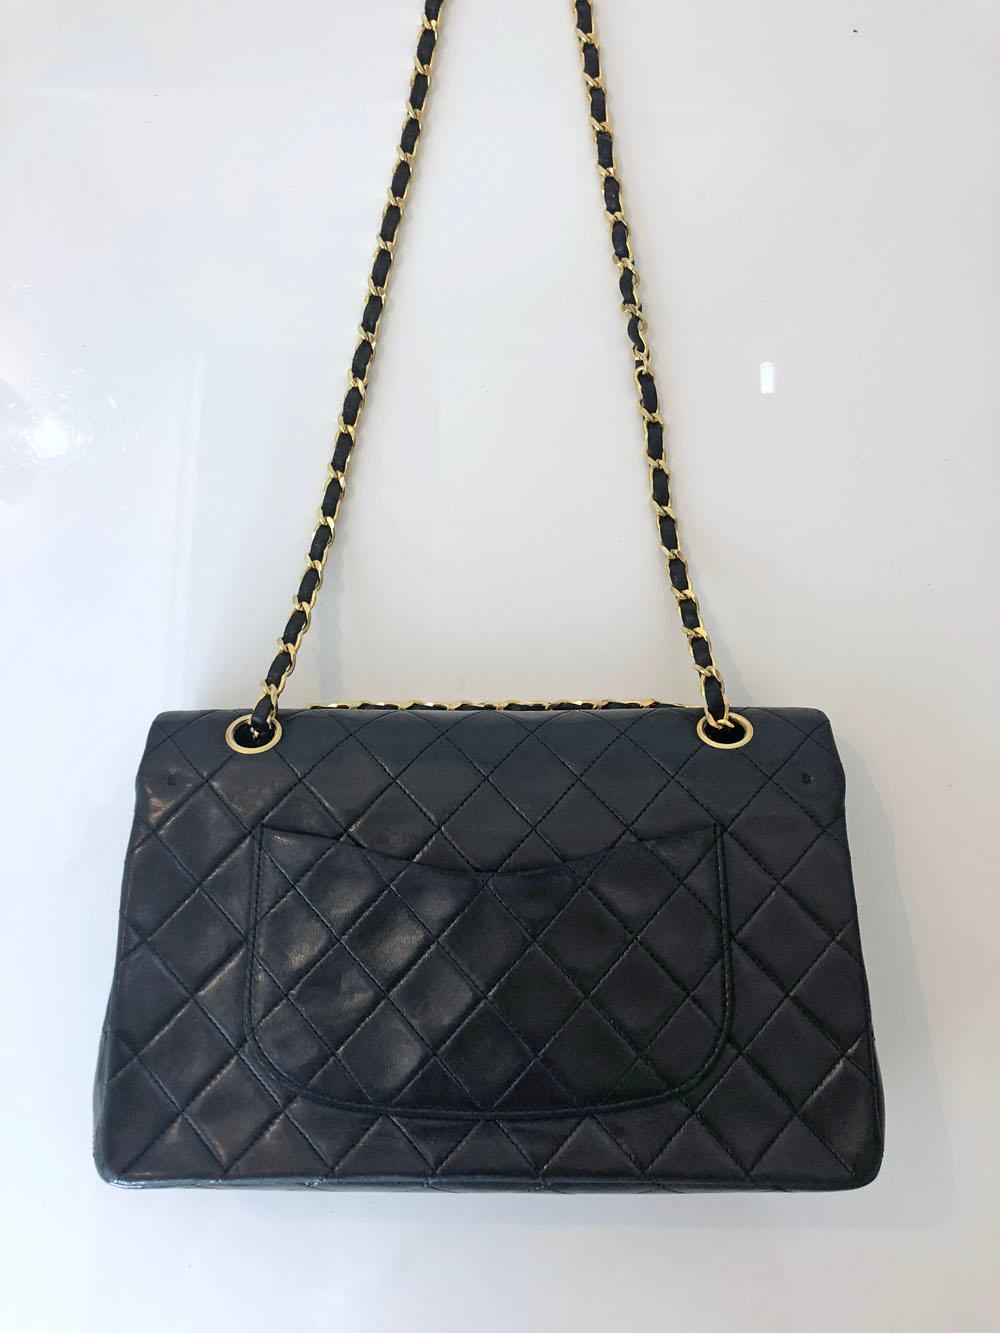 Vintage Chanel black quilted lambskin double flap bag with burgundy lambskin lining and gold hardware. One back slip pocket, one zip pocket under the top flap with a second inside flap covering the inside compartment and one inside slip pocket.